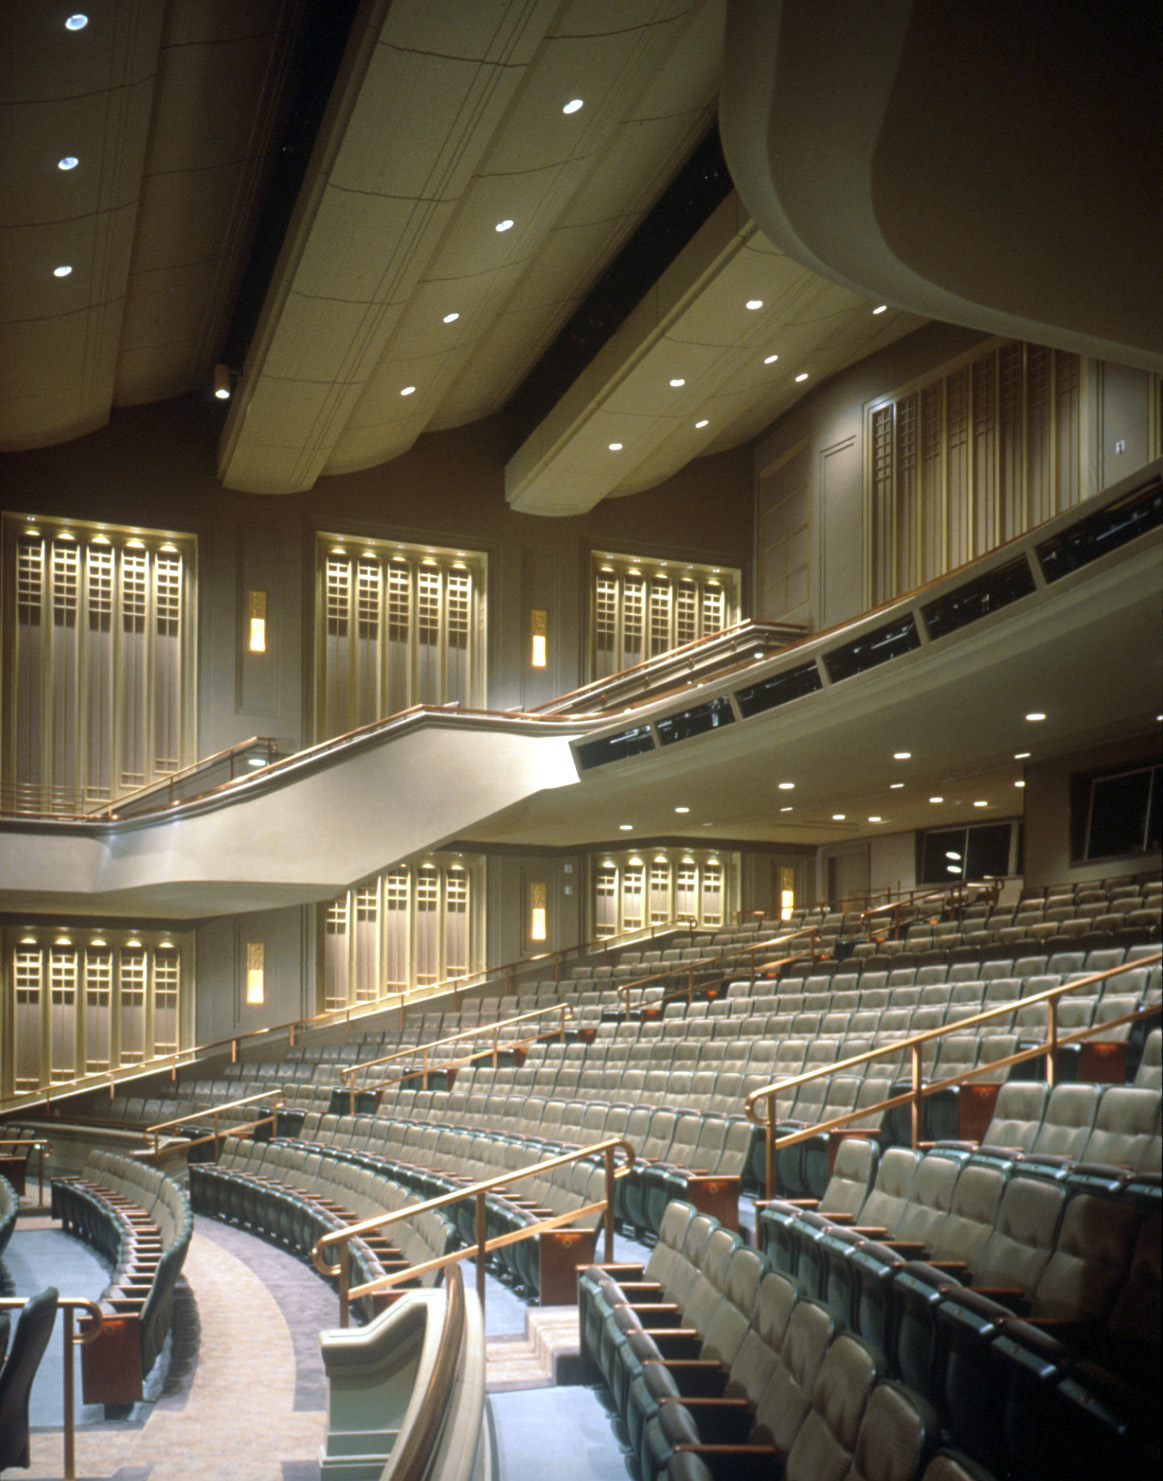 The 900-seat theatre supports smaller events in the Conference Center including breakout sessions, training and other conferences. Conference Center for The Church of Jesus Christ of Latter-Day Saints, Main Street Plaza at Temple Square & Downtown Master Plan, Salt Lake City, Utah © Timothy Hursley